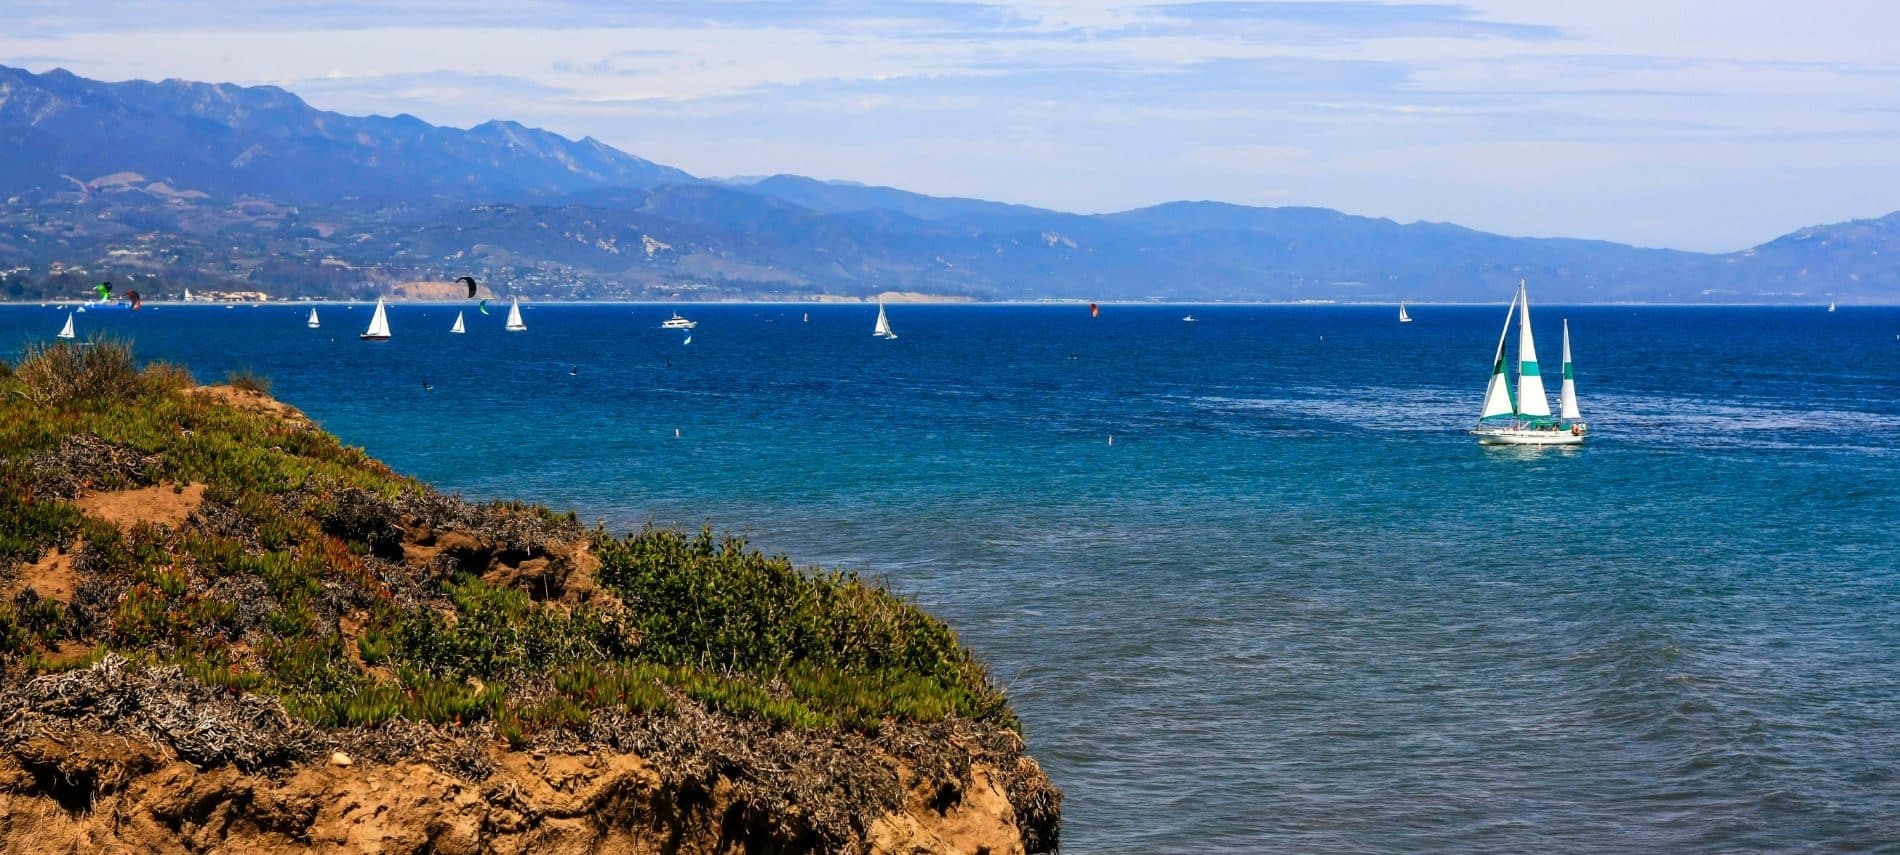 View of sailboats in the ocean from the cliffs of Shoreline Park in Santa Barbara